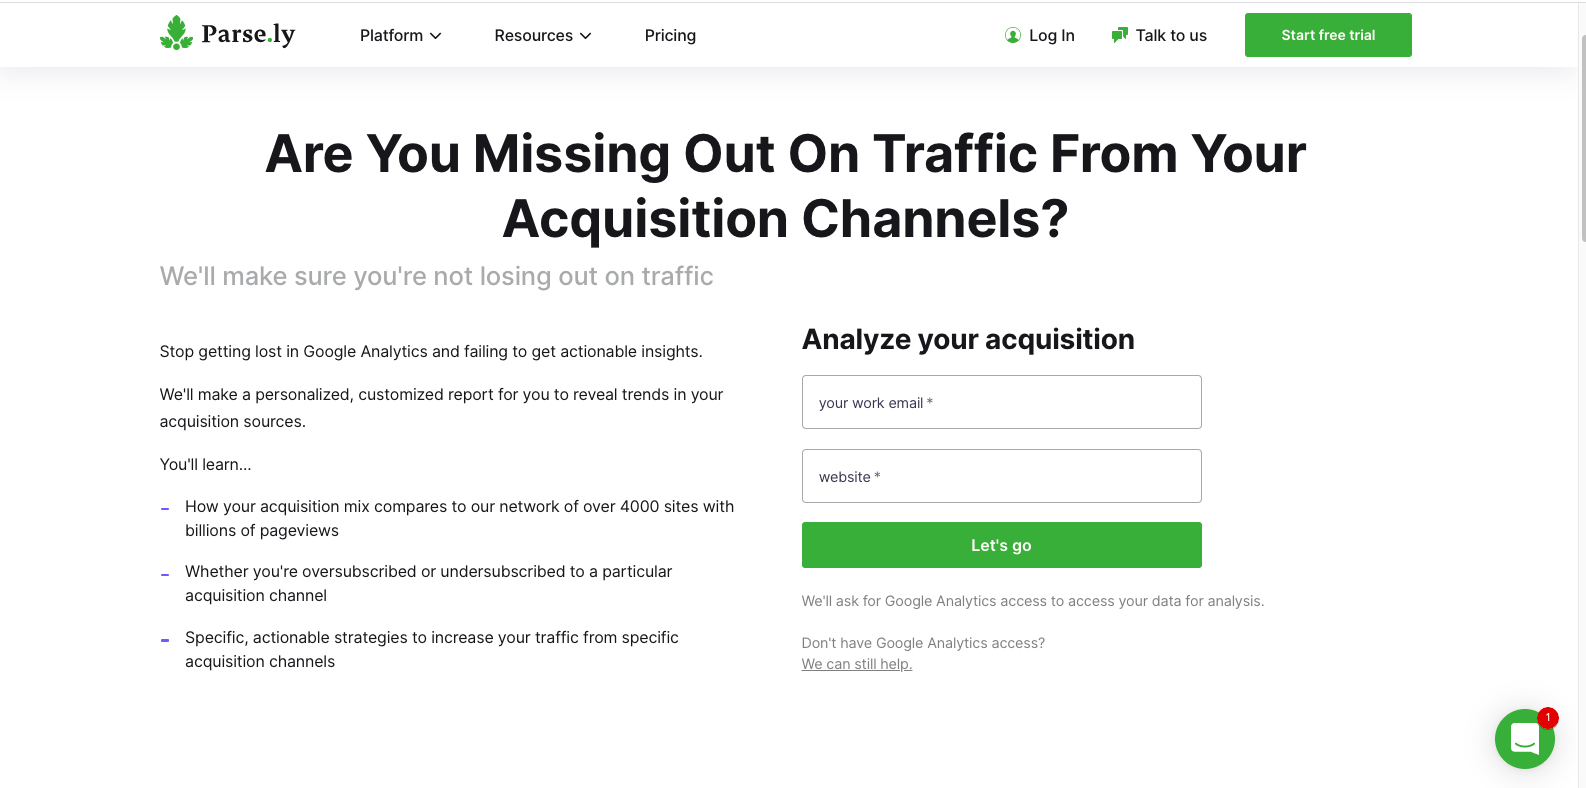 A webpage where Parse.ly offers to analyze a business’s website acquisition traffic in a personalized report